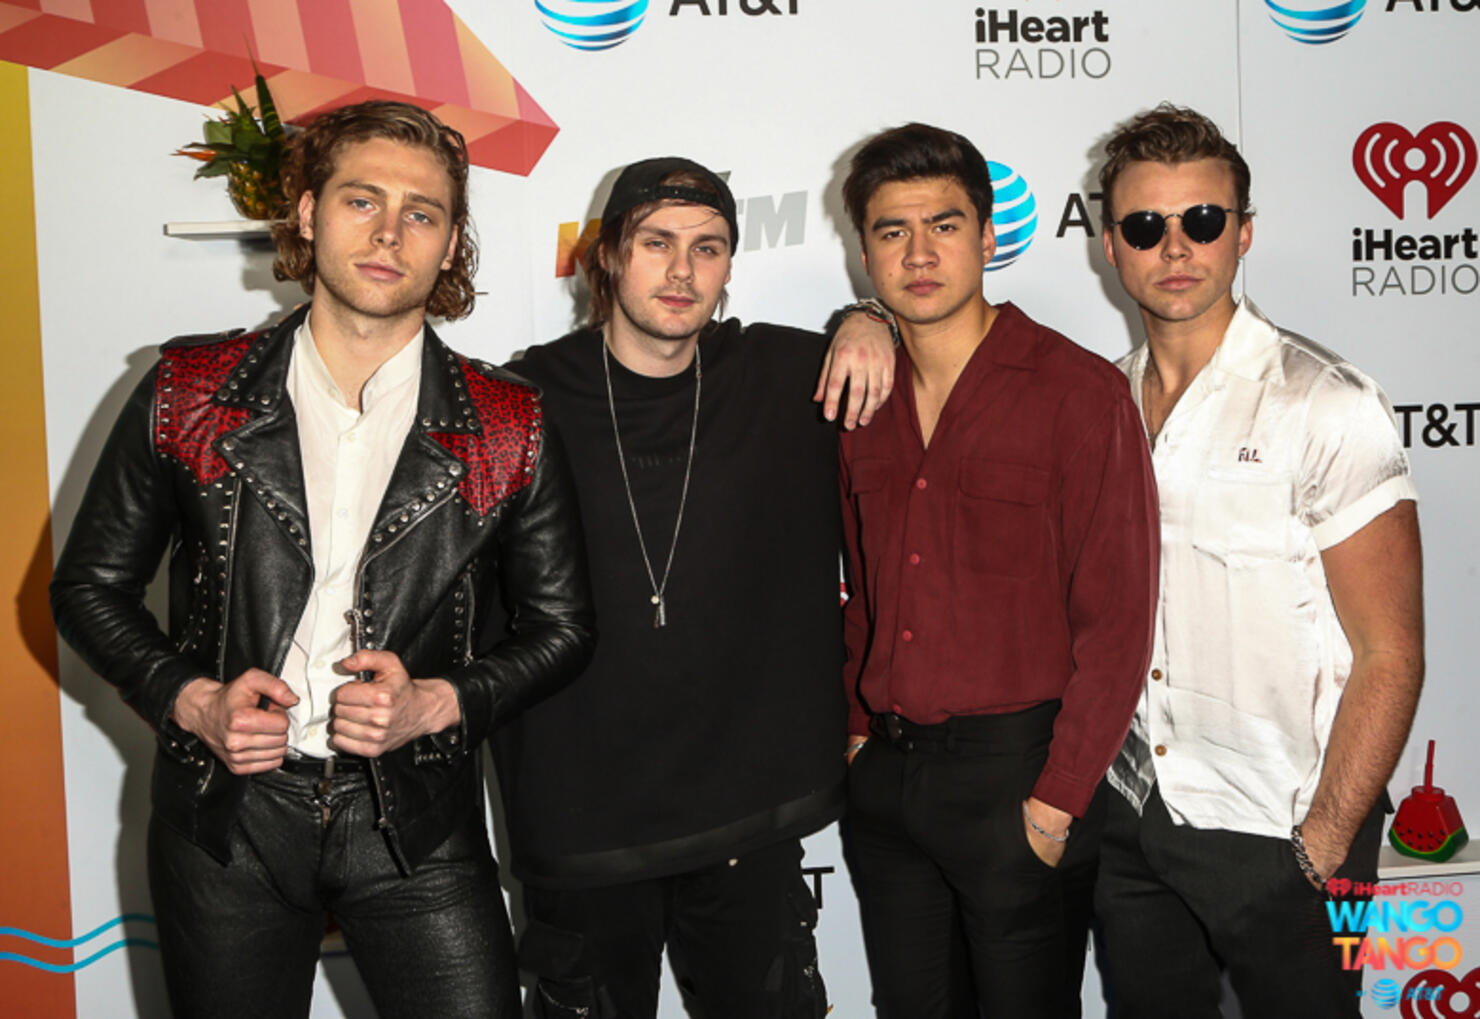  Ashton Irwin, Michael Clifford, Calum Hood and Luke Hemmings of 5 Seconds of Summer arrive at the 2018 iHeartRadio Wango Tango by AT&T at Banc of California Stadium on June 2, 2018 in Los Angeles, California.